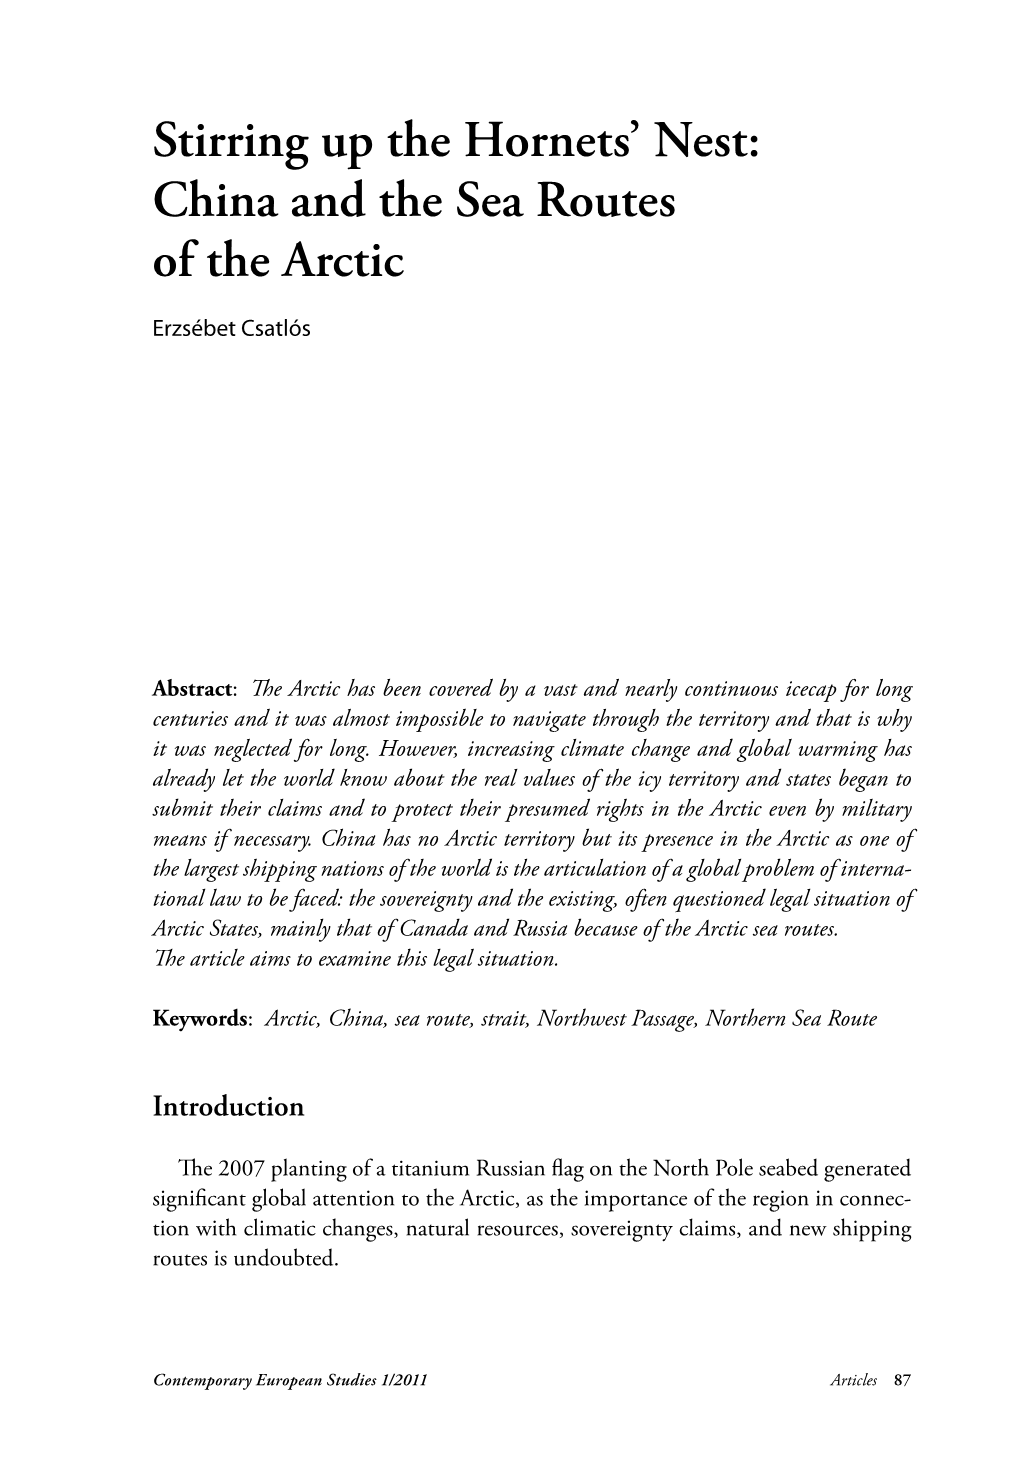 China and the Sea Routes of the Arctic